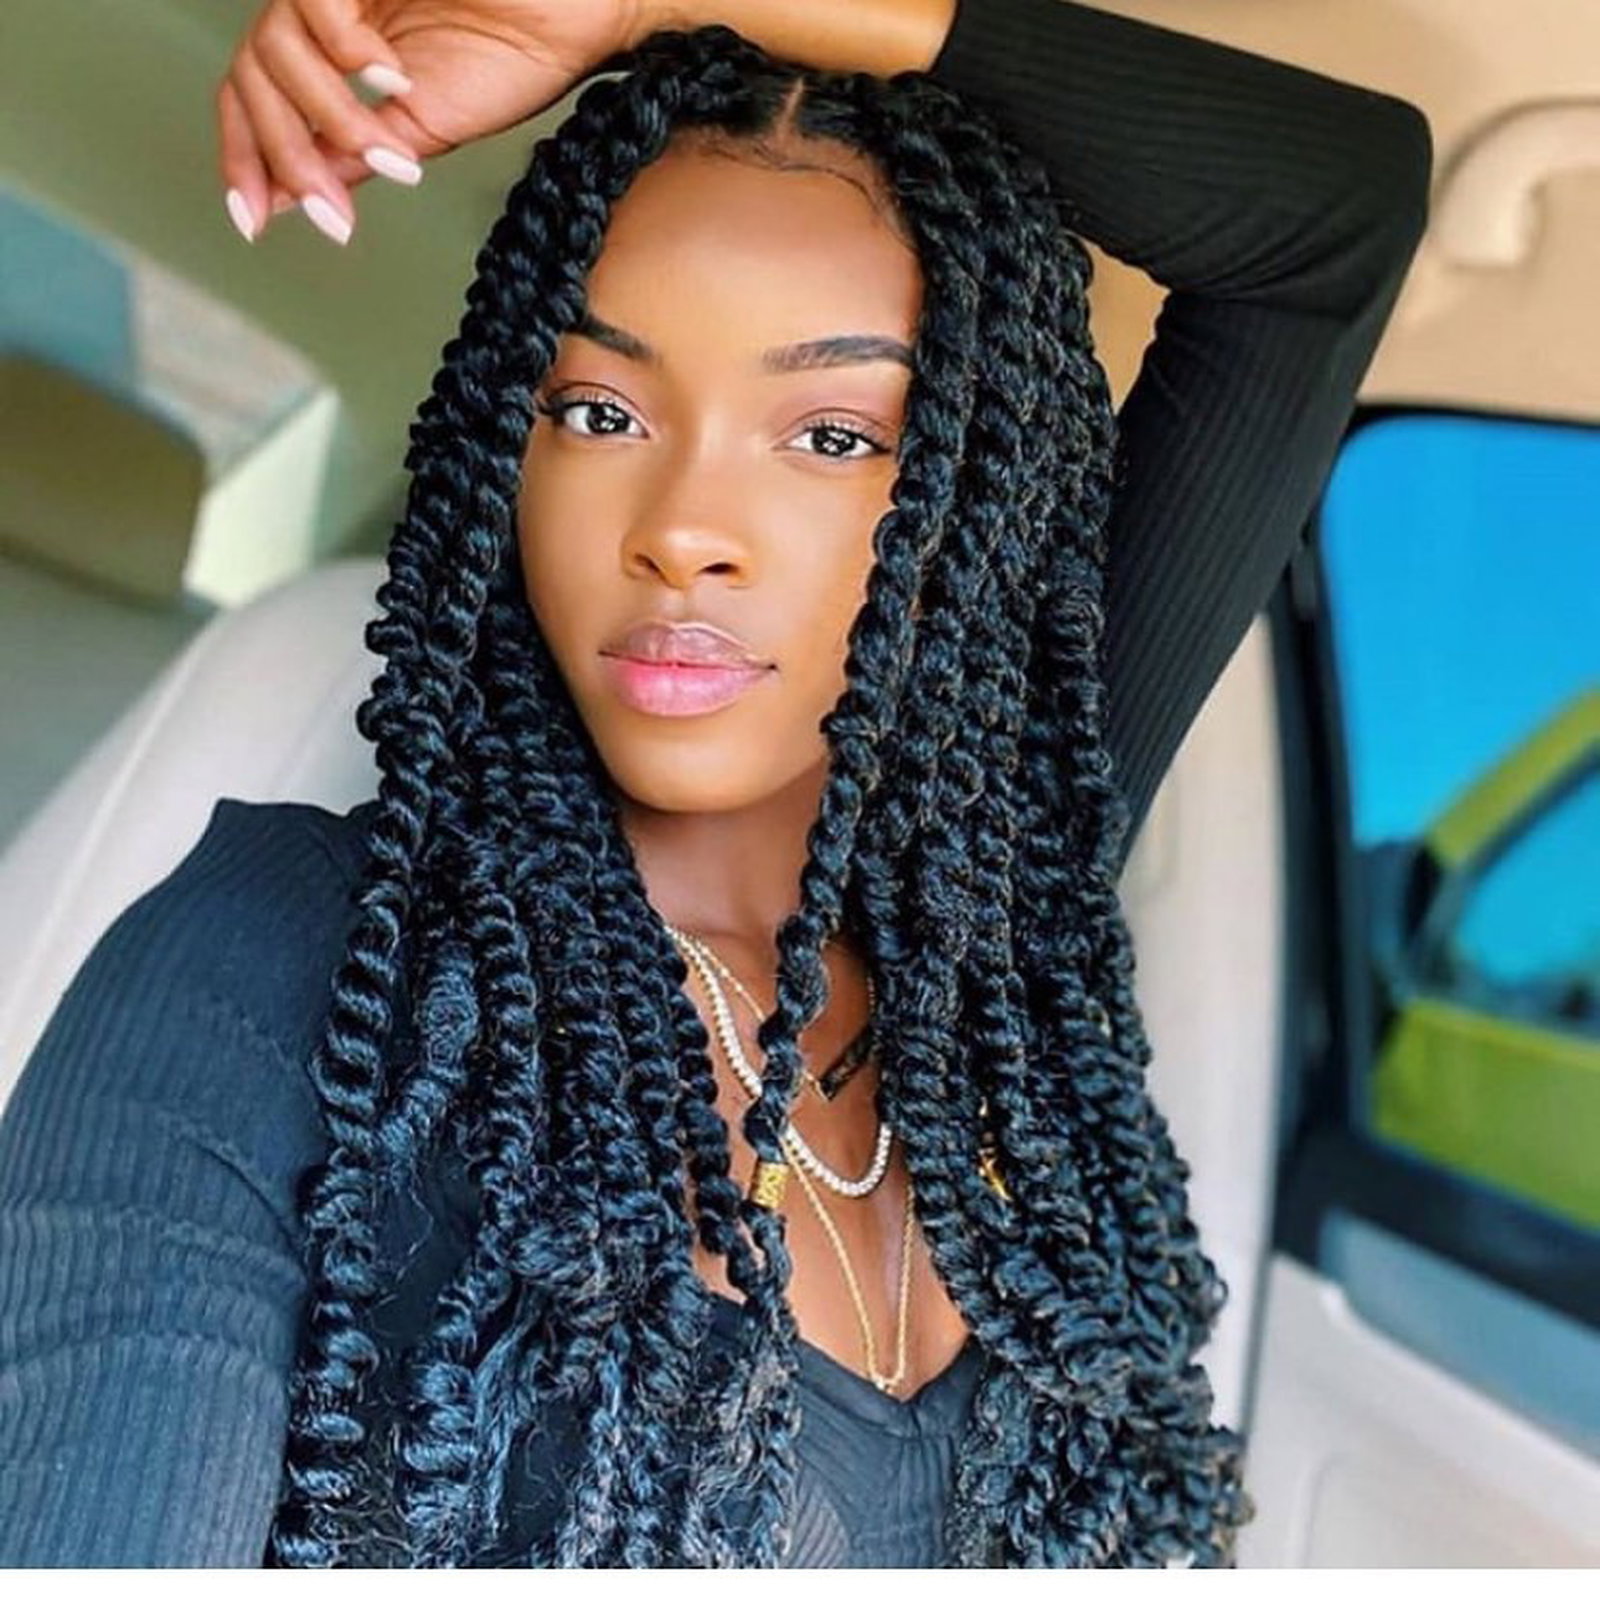 Photo by Devynsdogg with the username @Devynsdogg,  September 30, 2019 at 3:23 AM. The post is about the topic Black Beauties and the text says 'Beautiful and sexy! #blackgirls #ebony #sexyfemales #babes #beautifulgirls
https://www.instagram.com/p/B3A30JMpQGn/?utm_source=ig_web_copy_link'